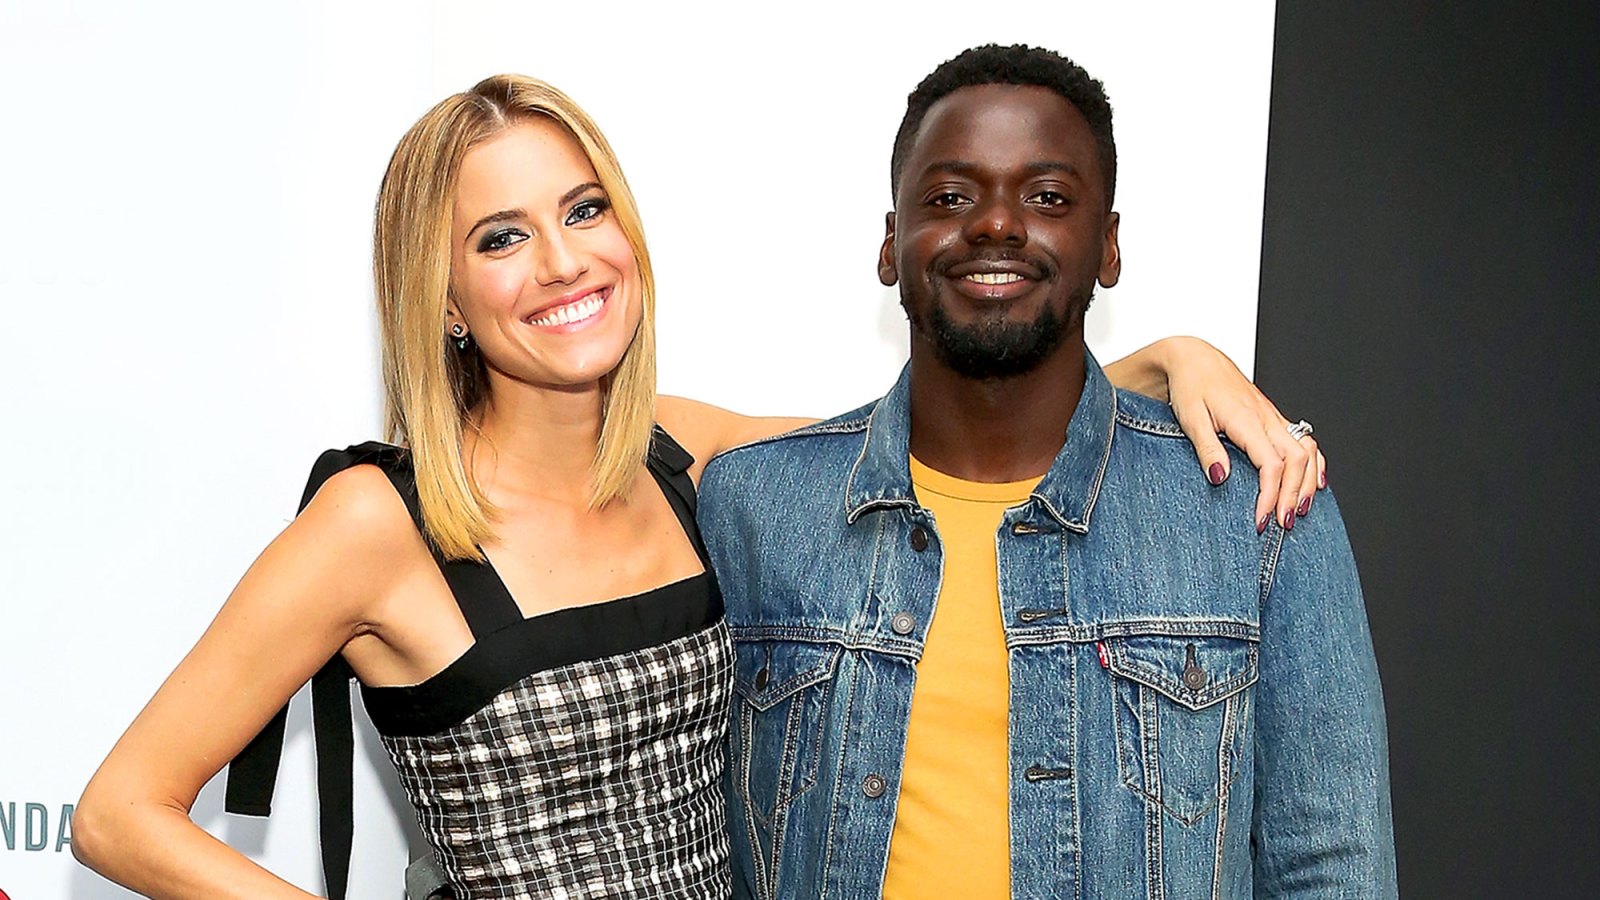 Allison Williams and Daniel Kaluuya attend SAG-AFTRA Foundation Conversations "Get Out" at SAG-AFTRA Foundation Robin Williams Center on October 11, 2017 in New York City.